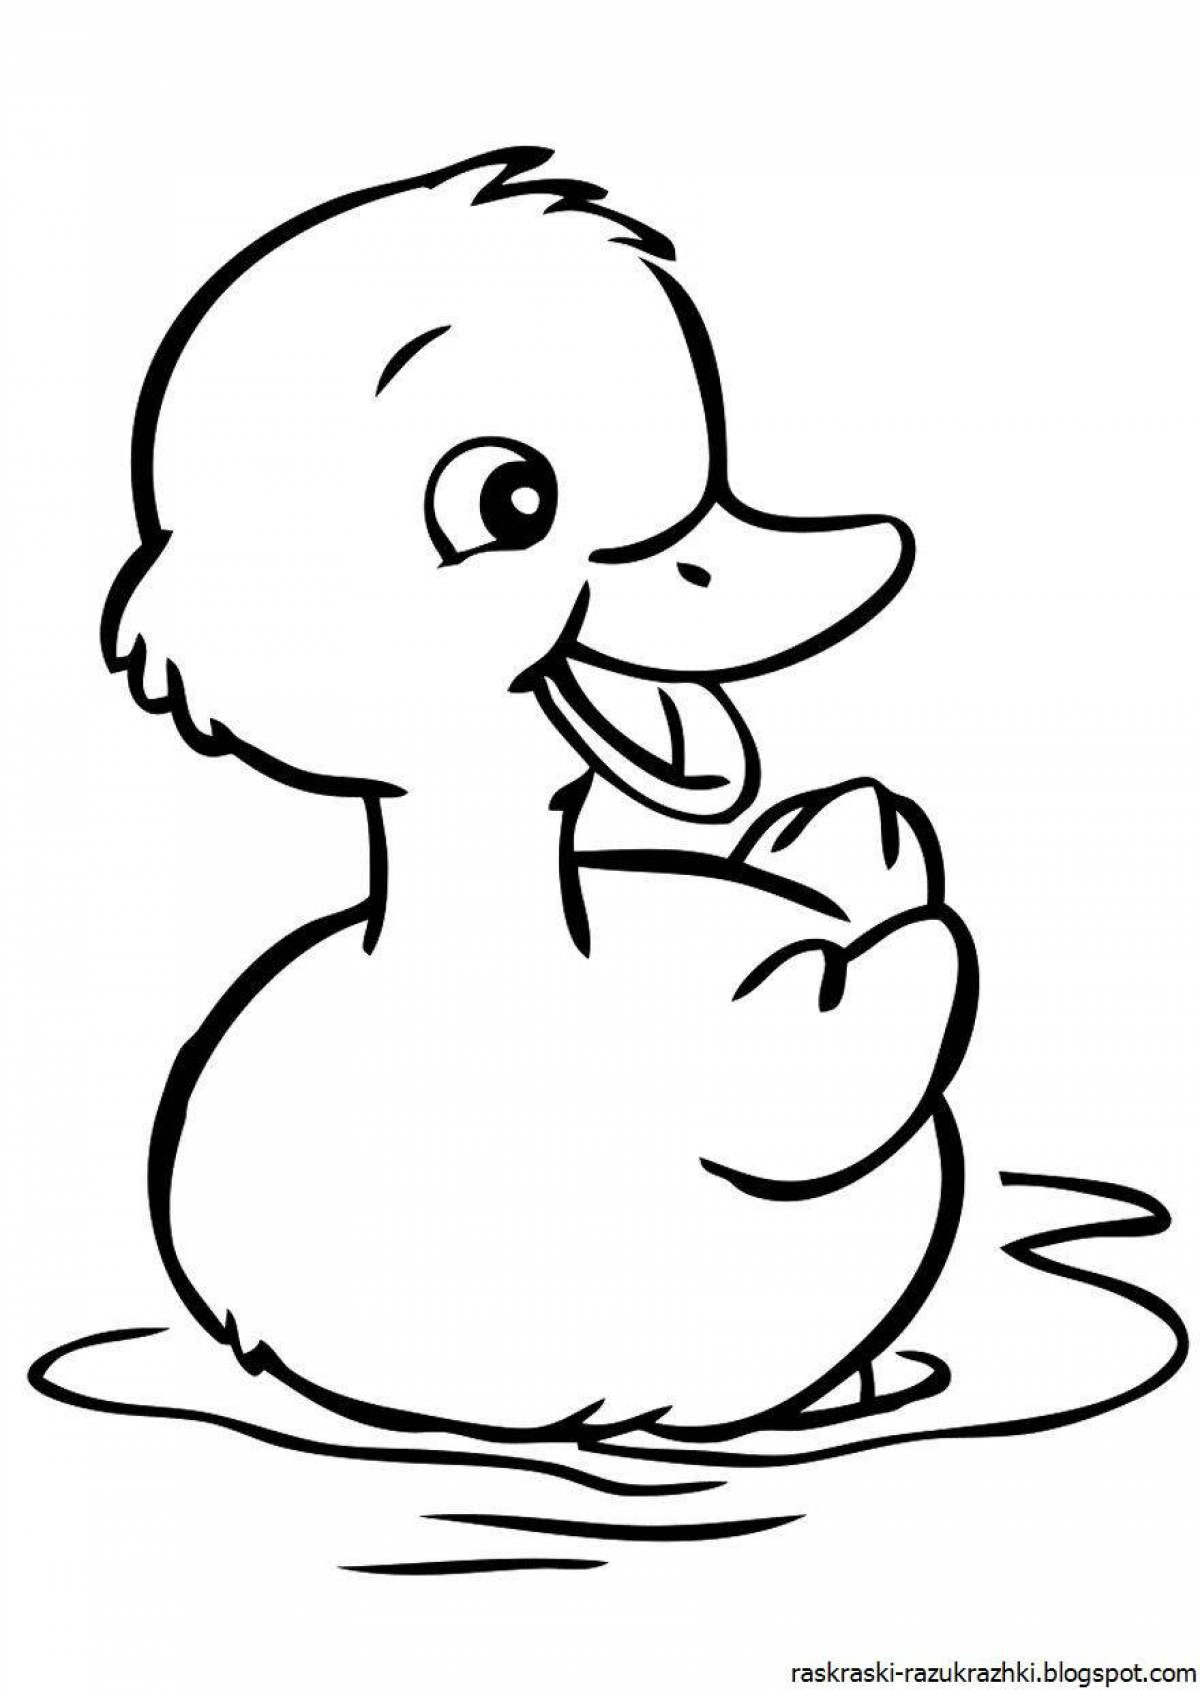 Colorful duck coloring book for kids